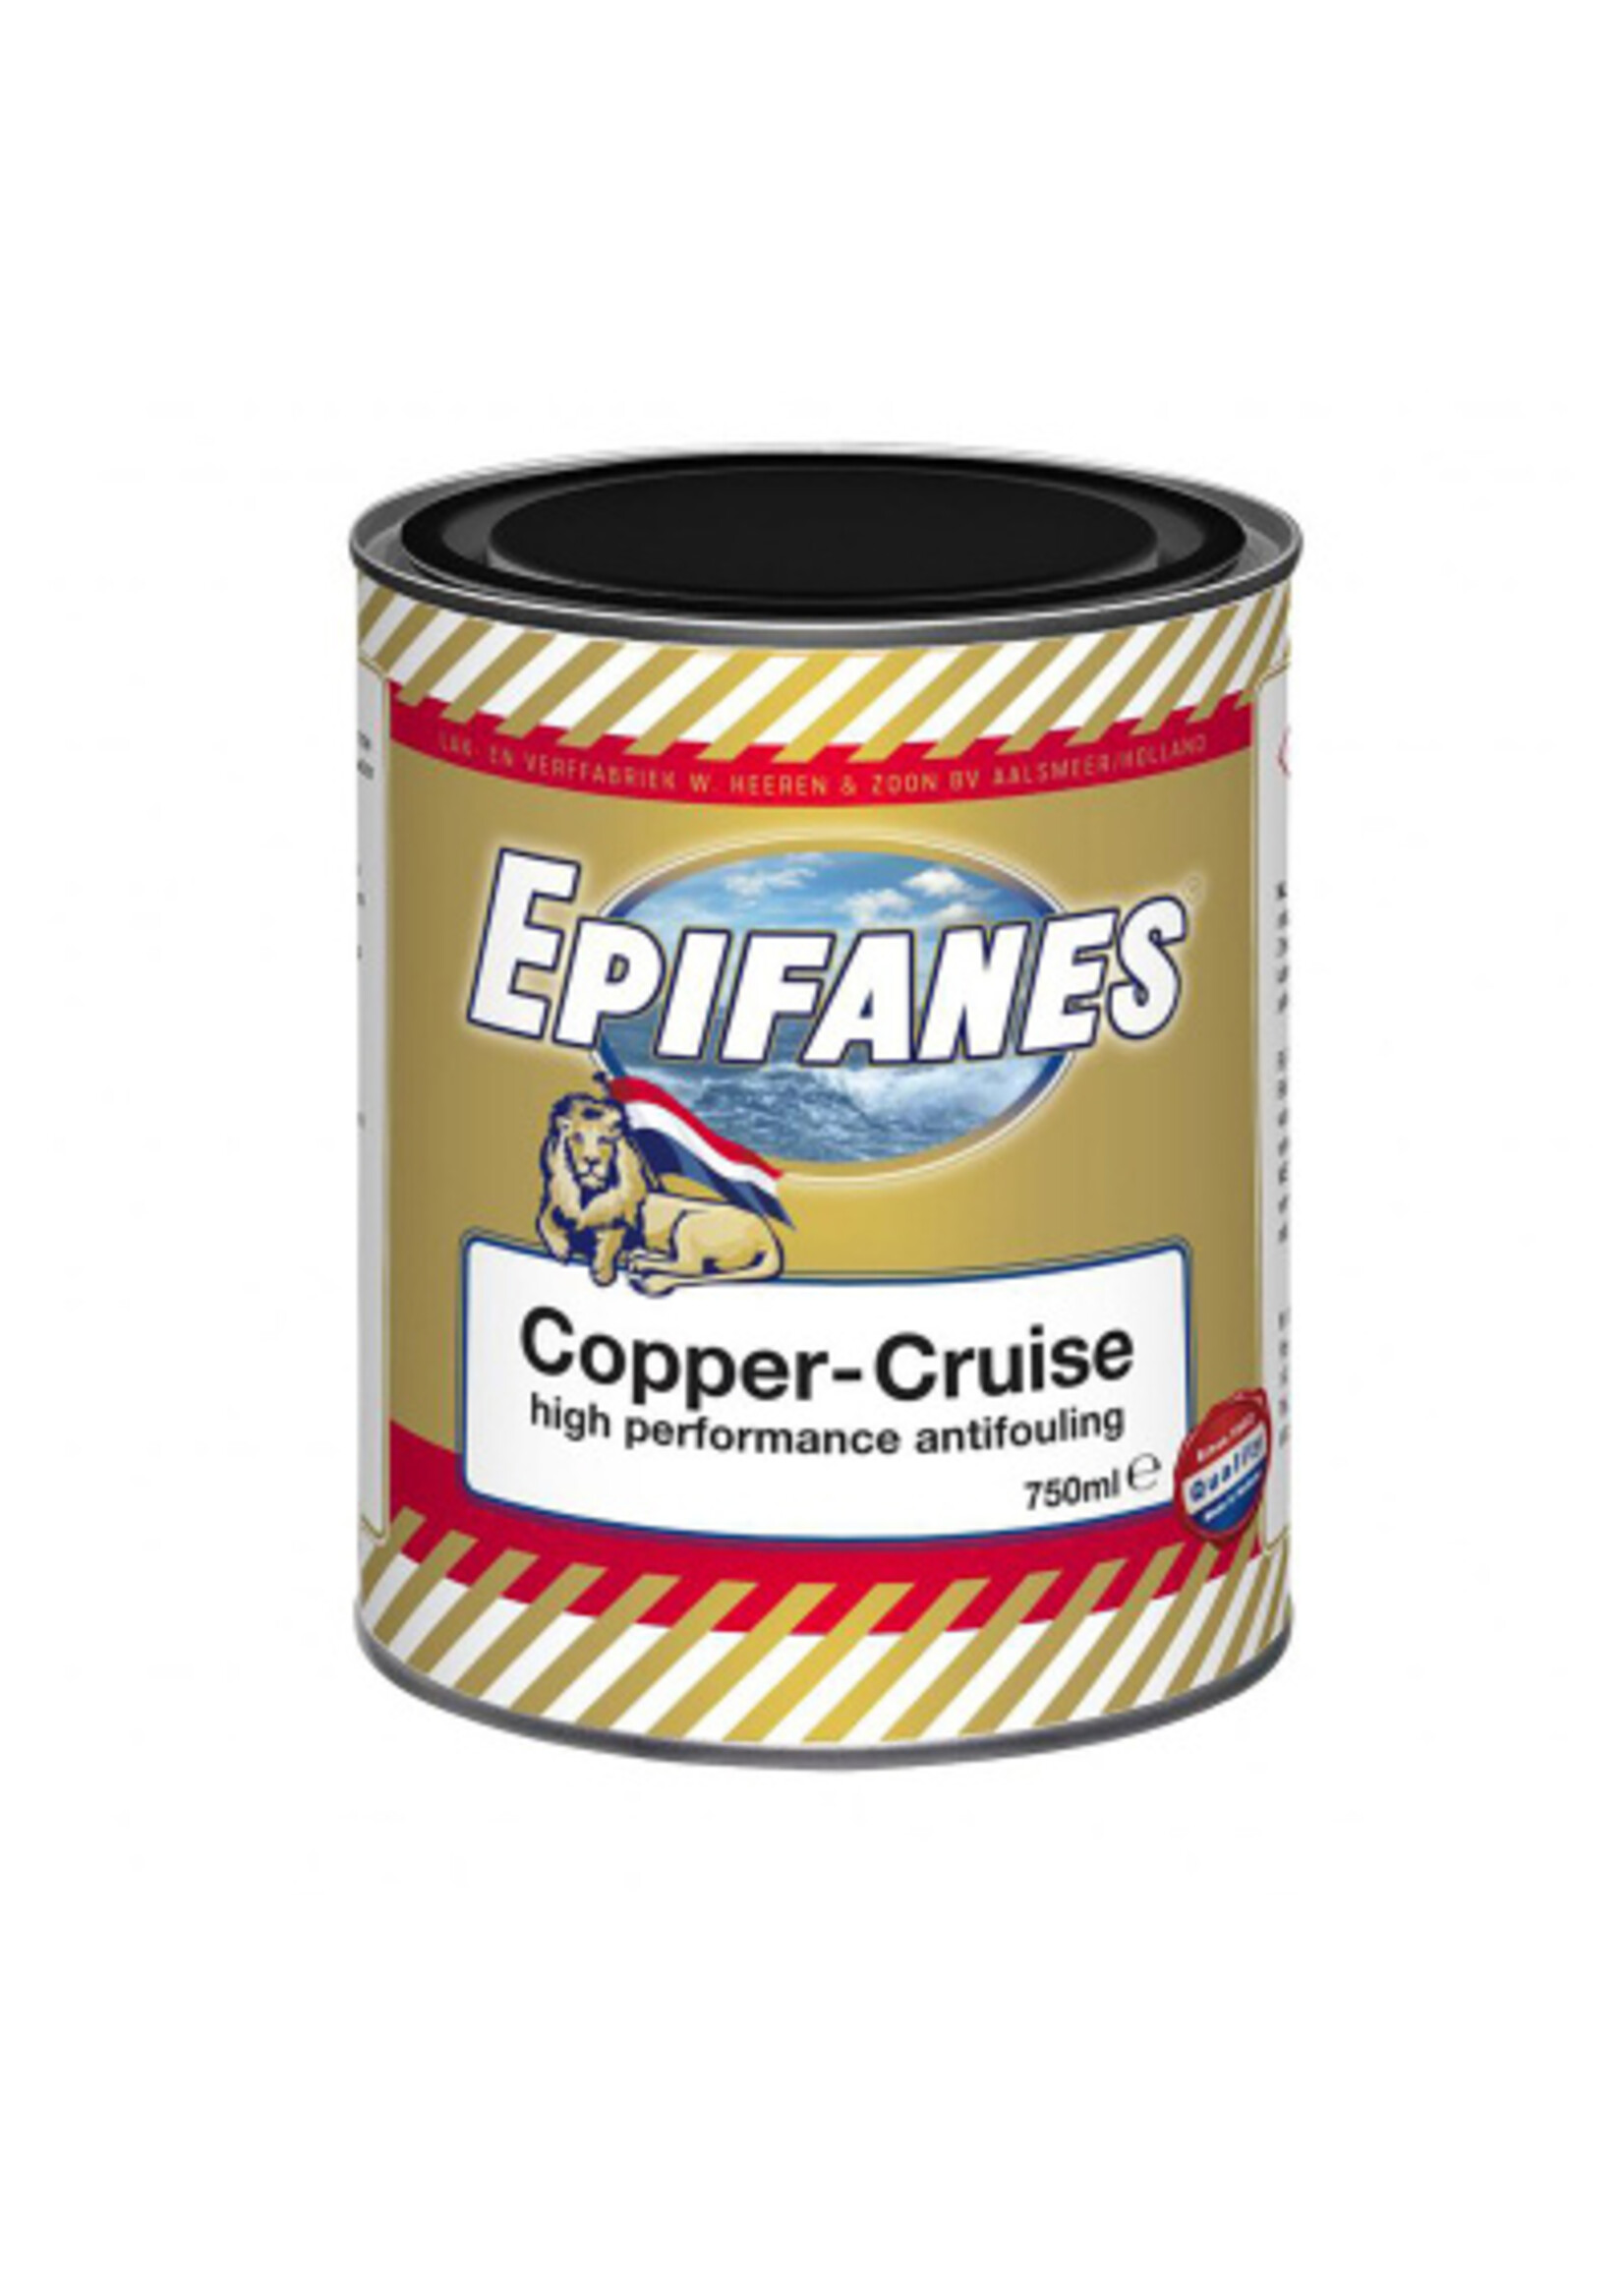 Epifanes Copper-Cruise - Antifouling Roodbruin